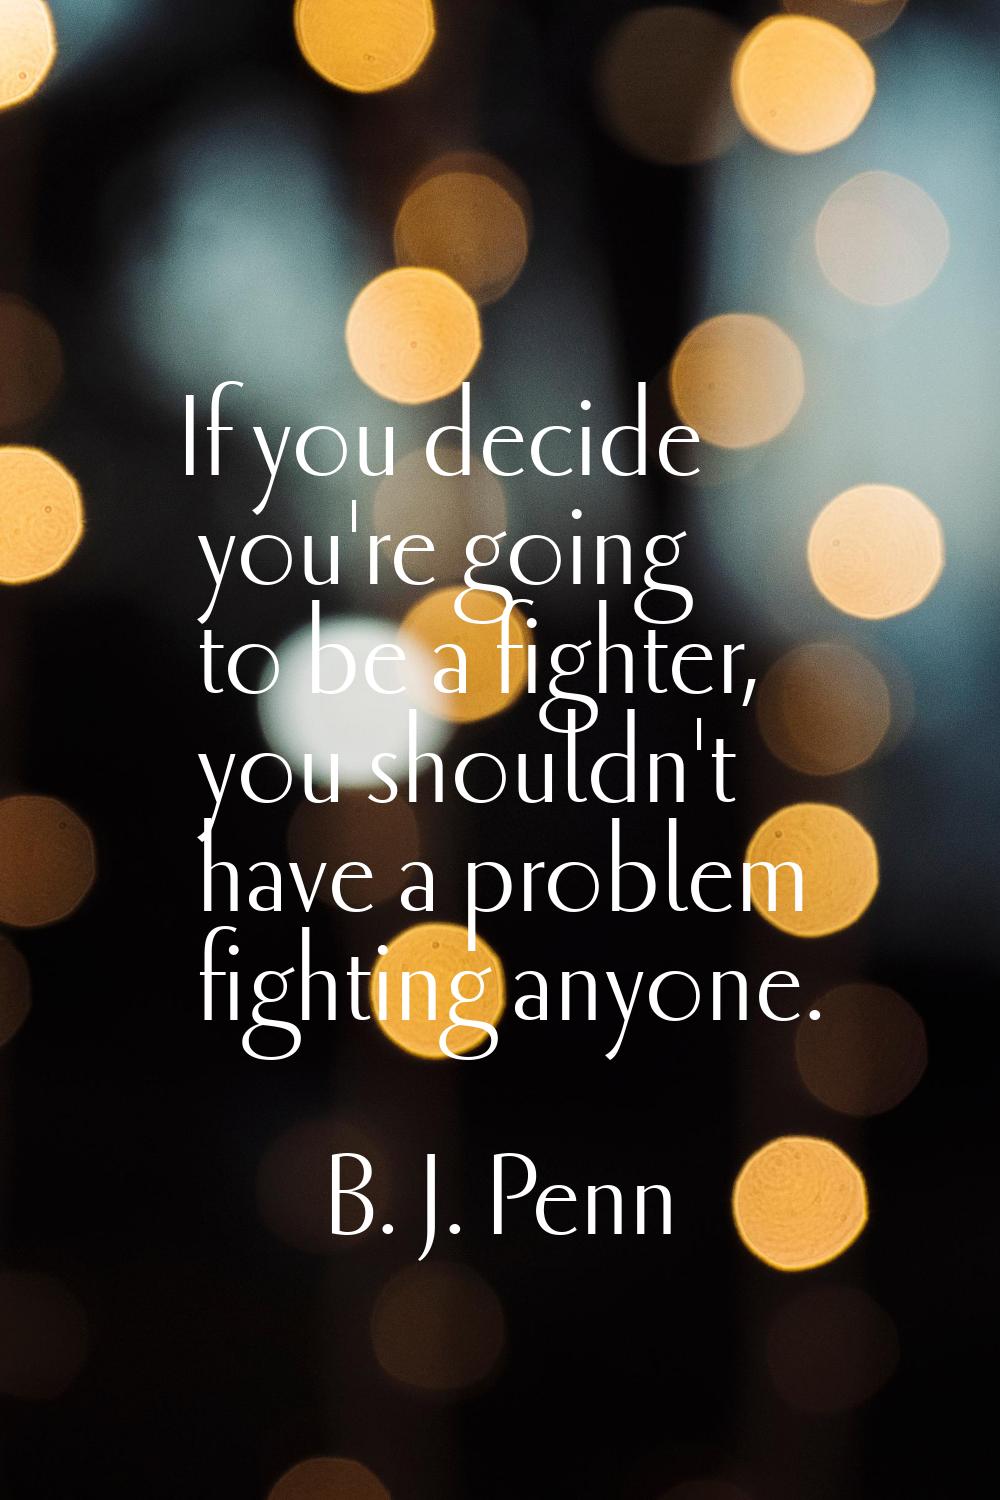 If you decide you're going to be a fighter, you shouldn't have a problem fighting anyone.